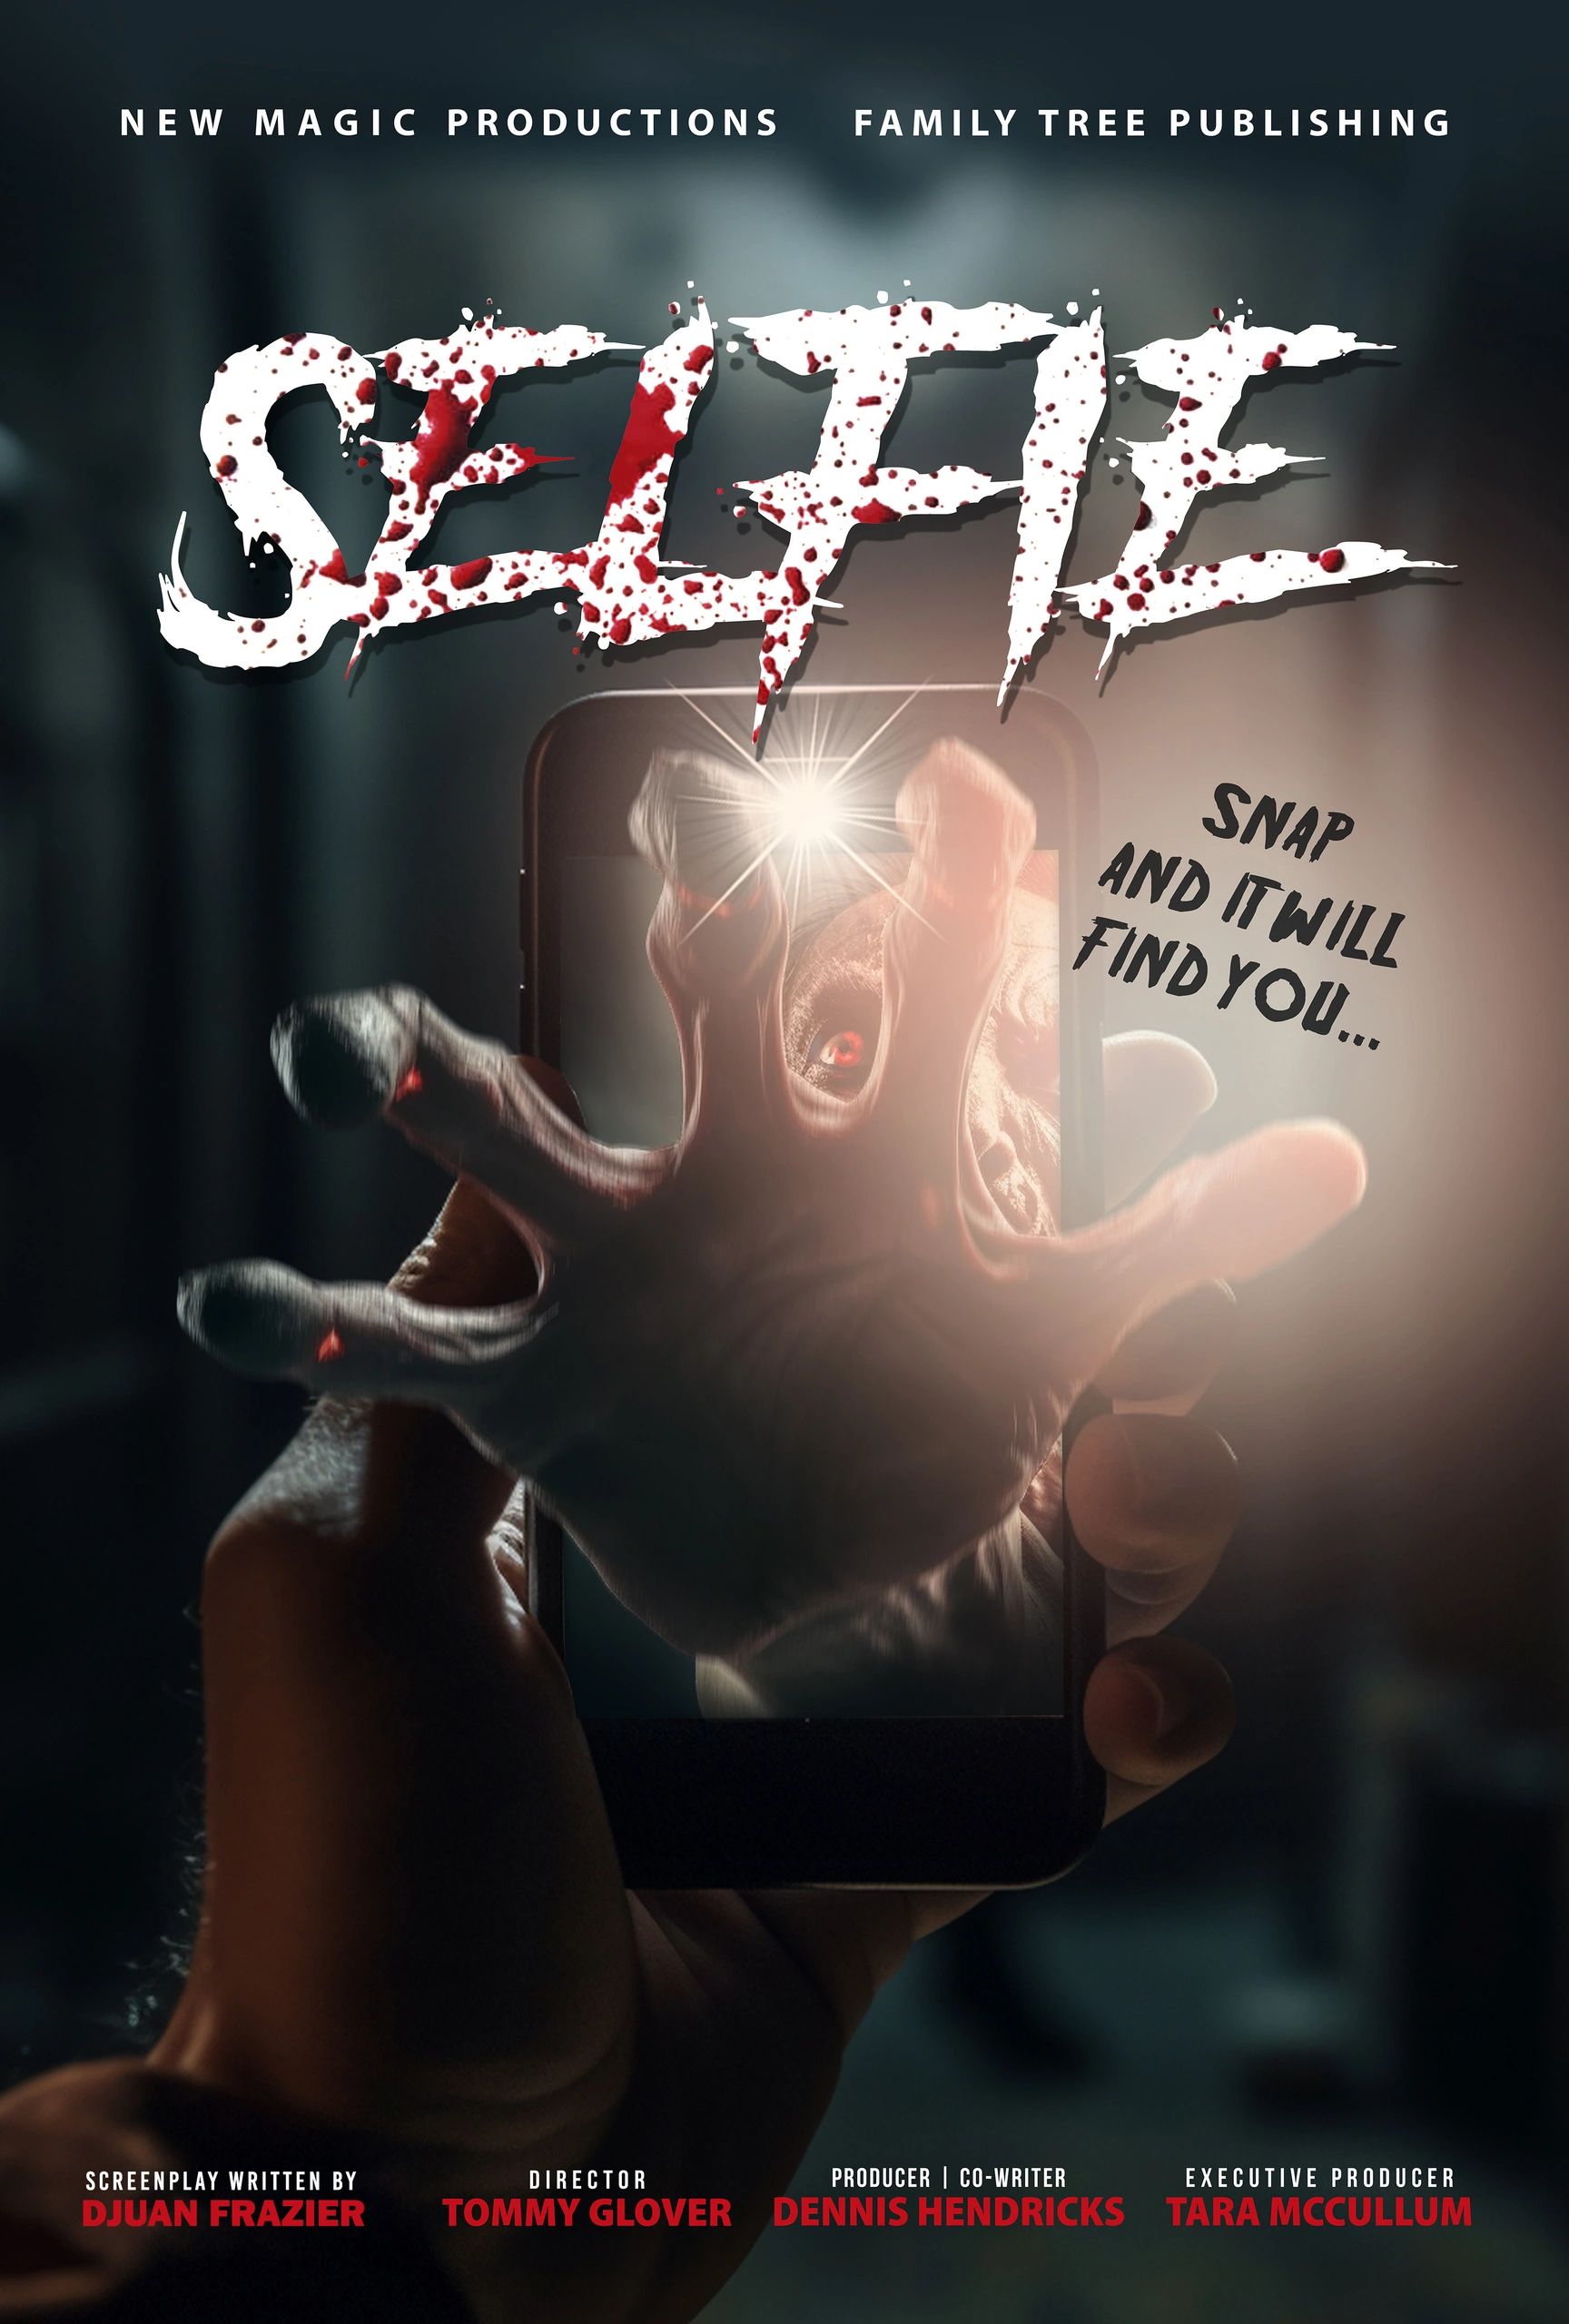 Selfie Movie Poster 
Property of New Magic Productions Network 2023